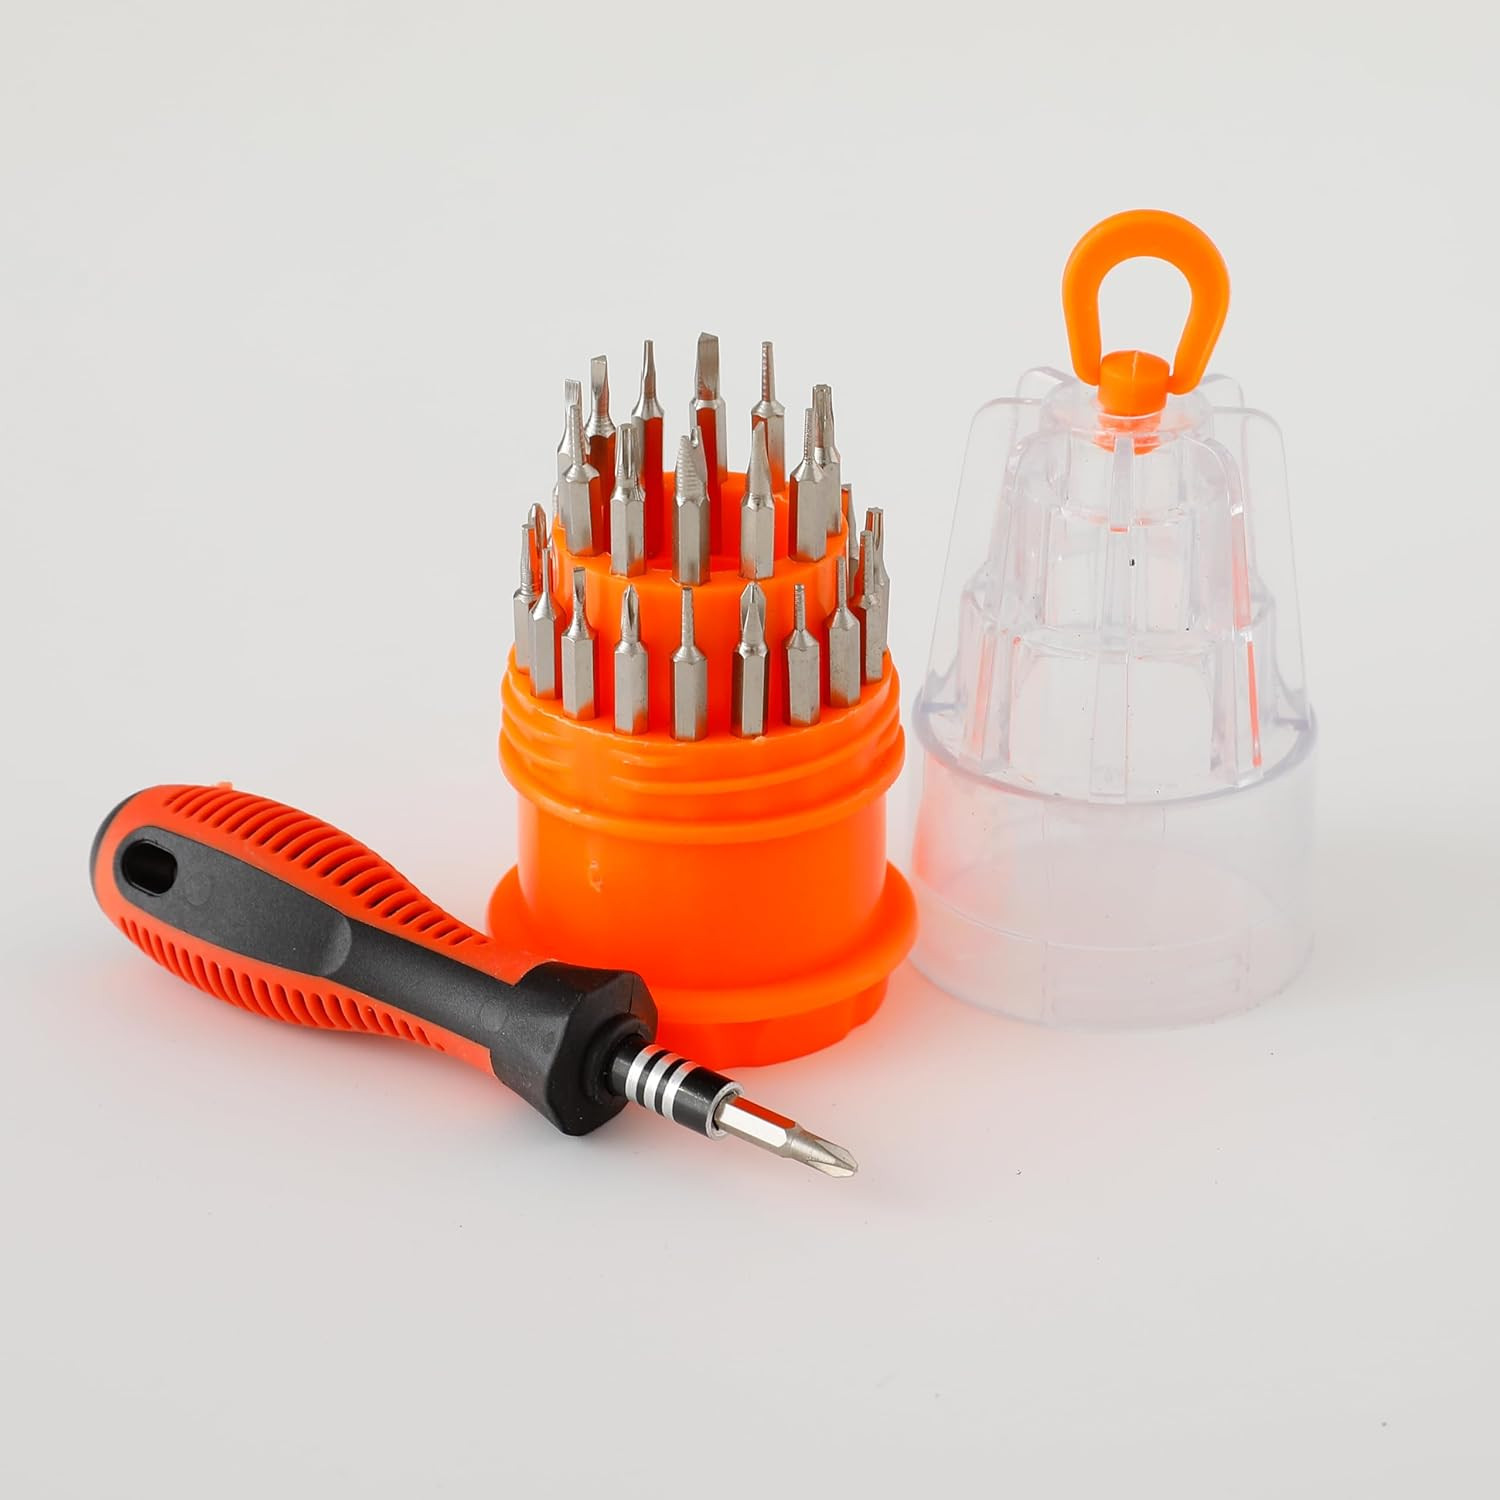 Kuber Industries Screwdriver Bits Set|31 In One With 31 Screws|Professional Magnetic Driver Set|Idol For Laptop, Mobile, Computer, Repairing Preparations (Orange)